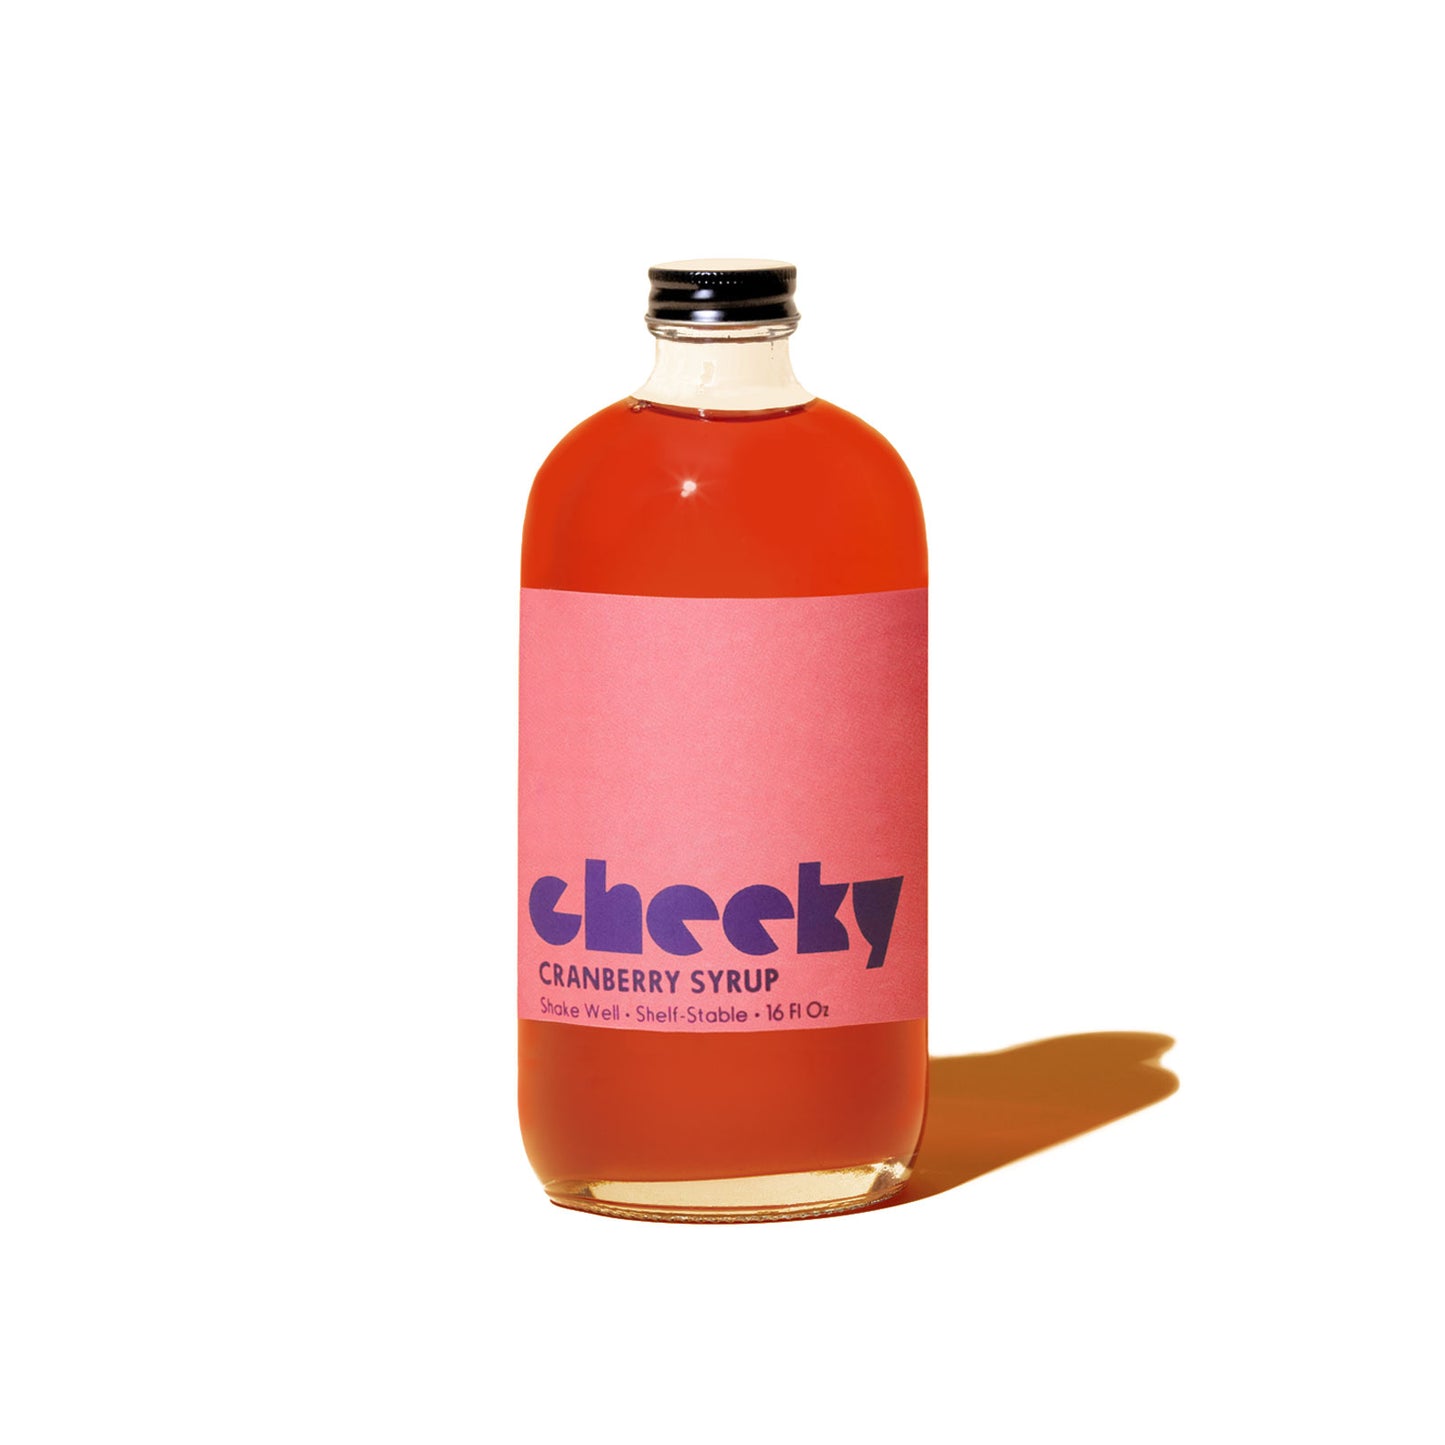 Cheeky Cranberry Syrup, 16oz